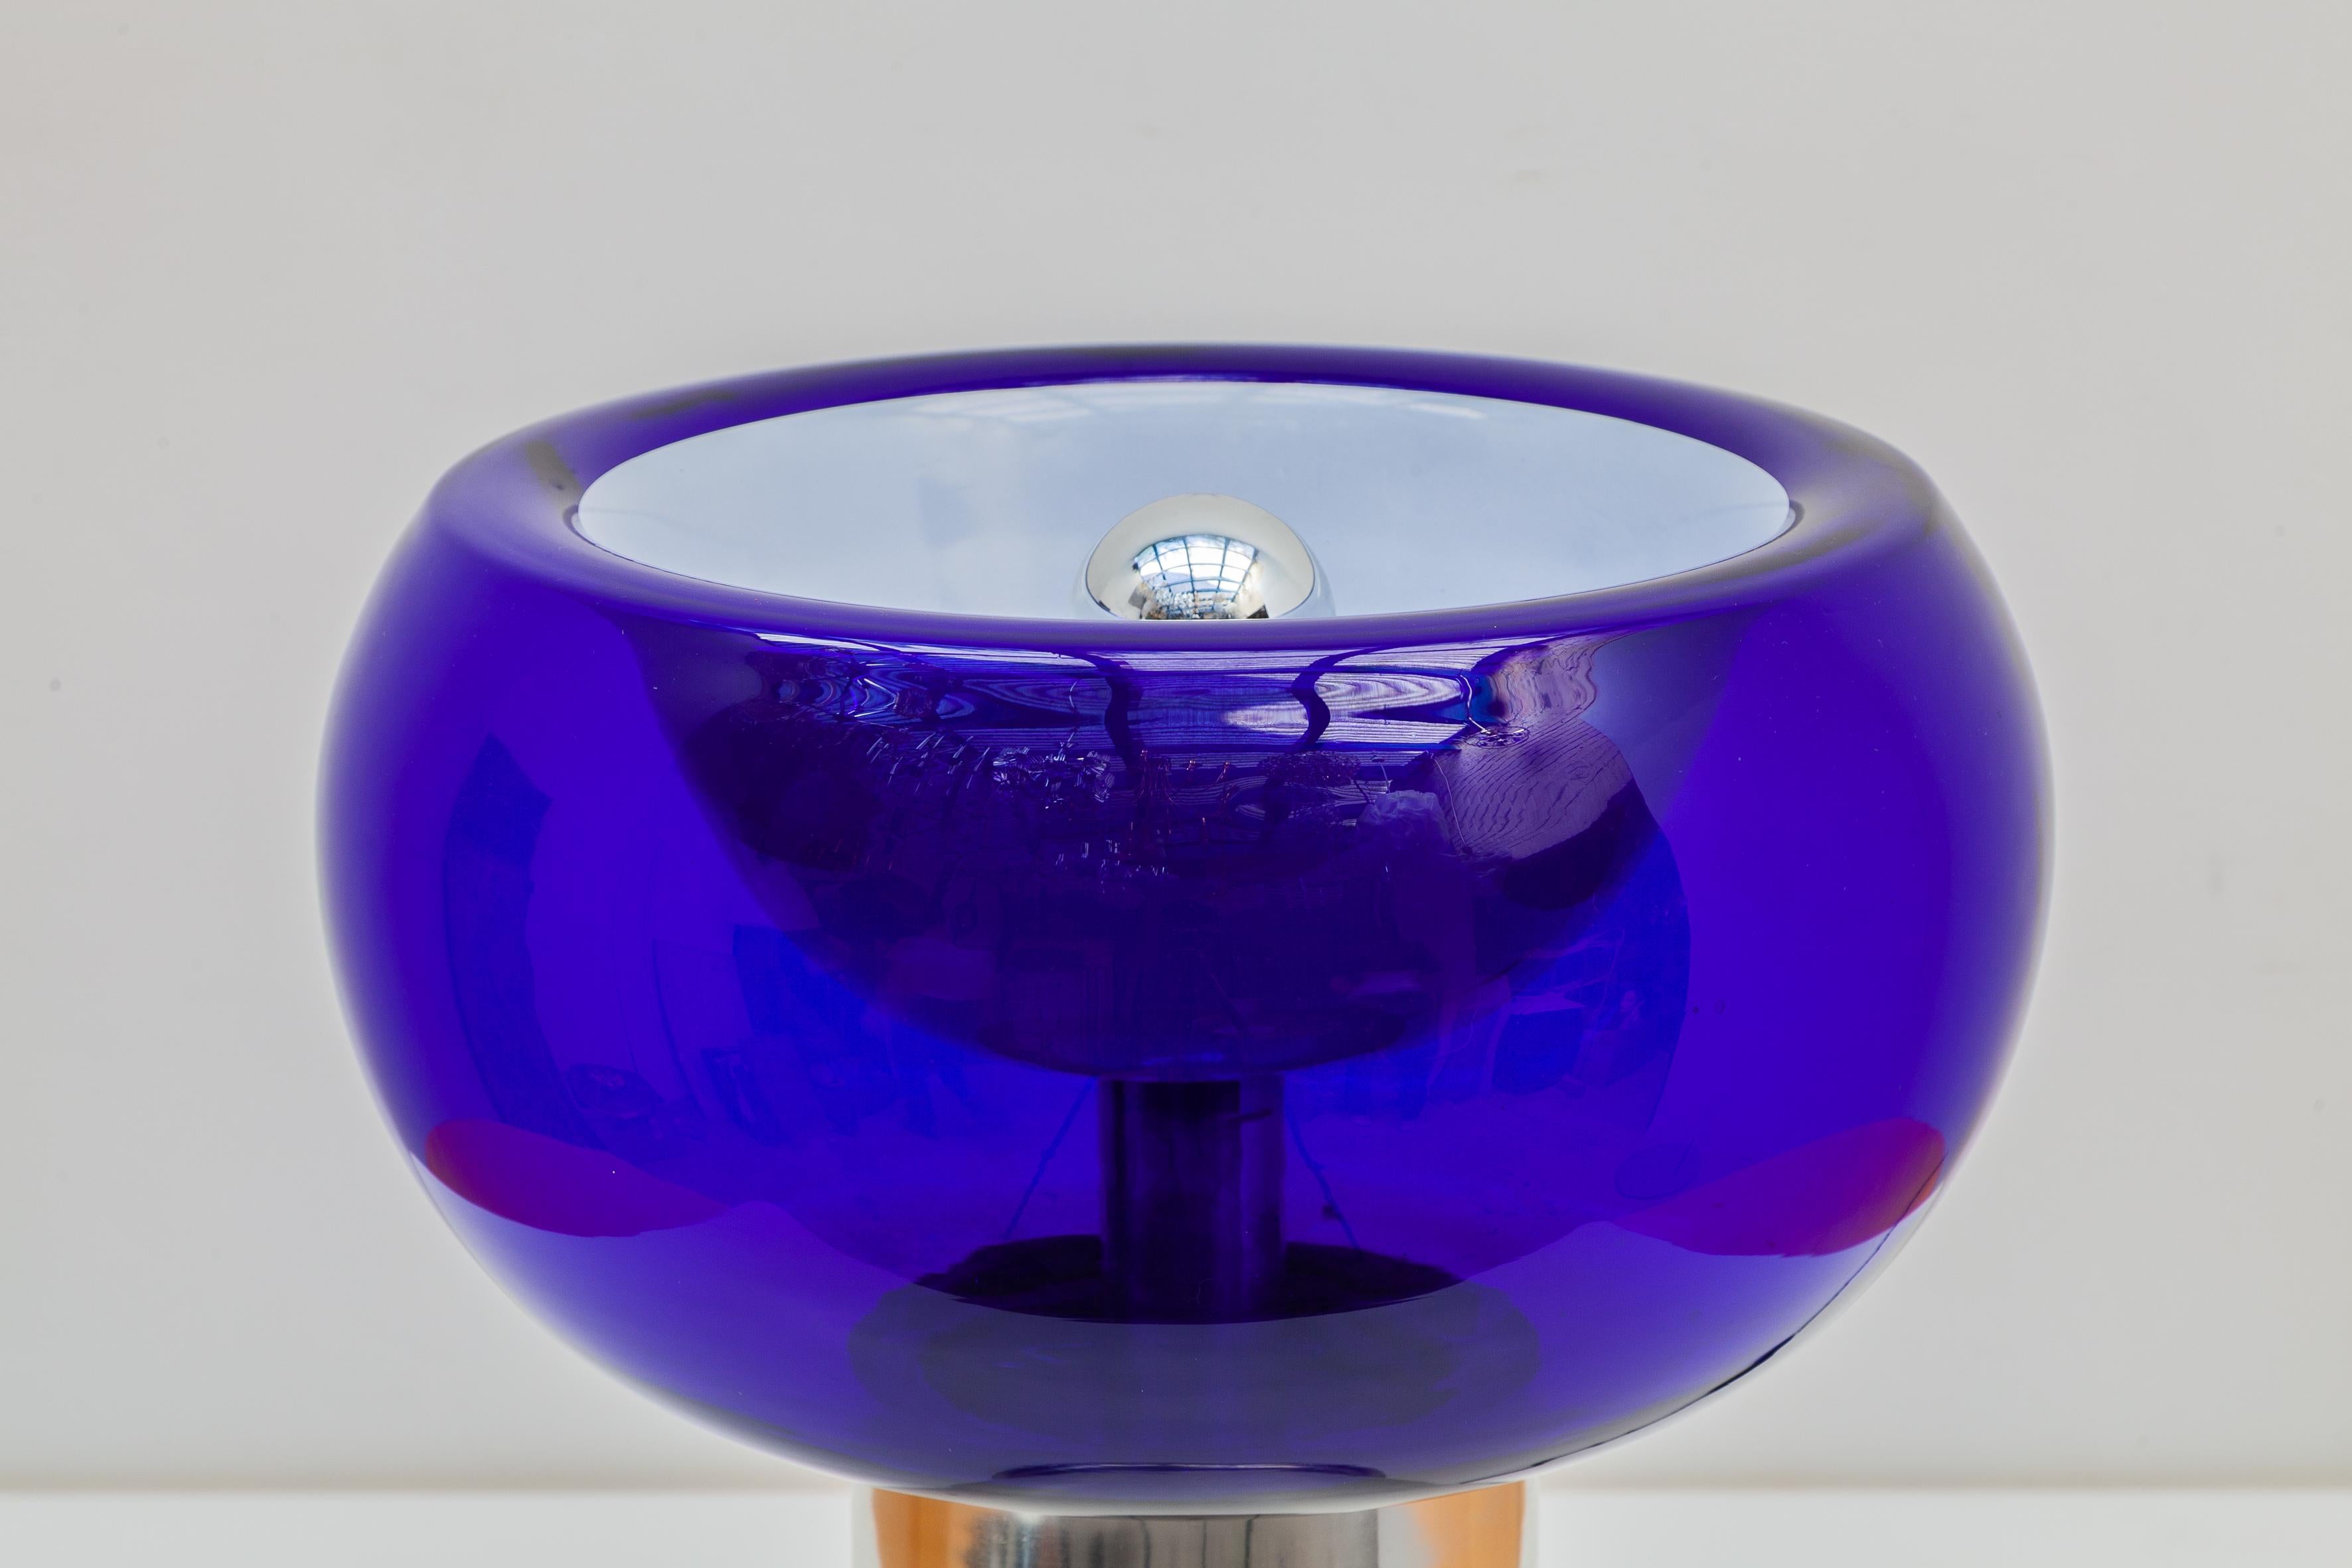 Mid-Century Modern Table Lamp with Cobalt Blue Glass Shade designed by Doria 1970s, Germany